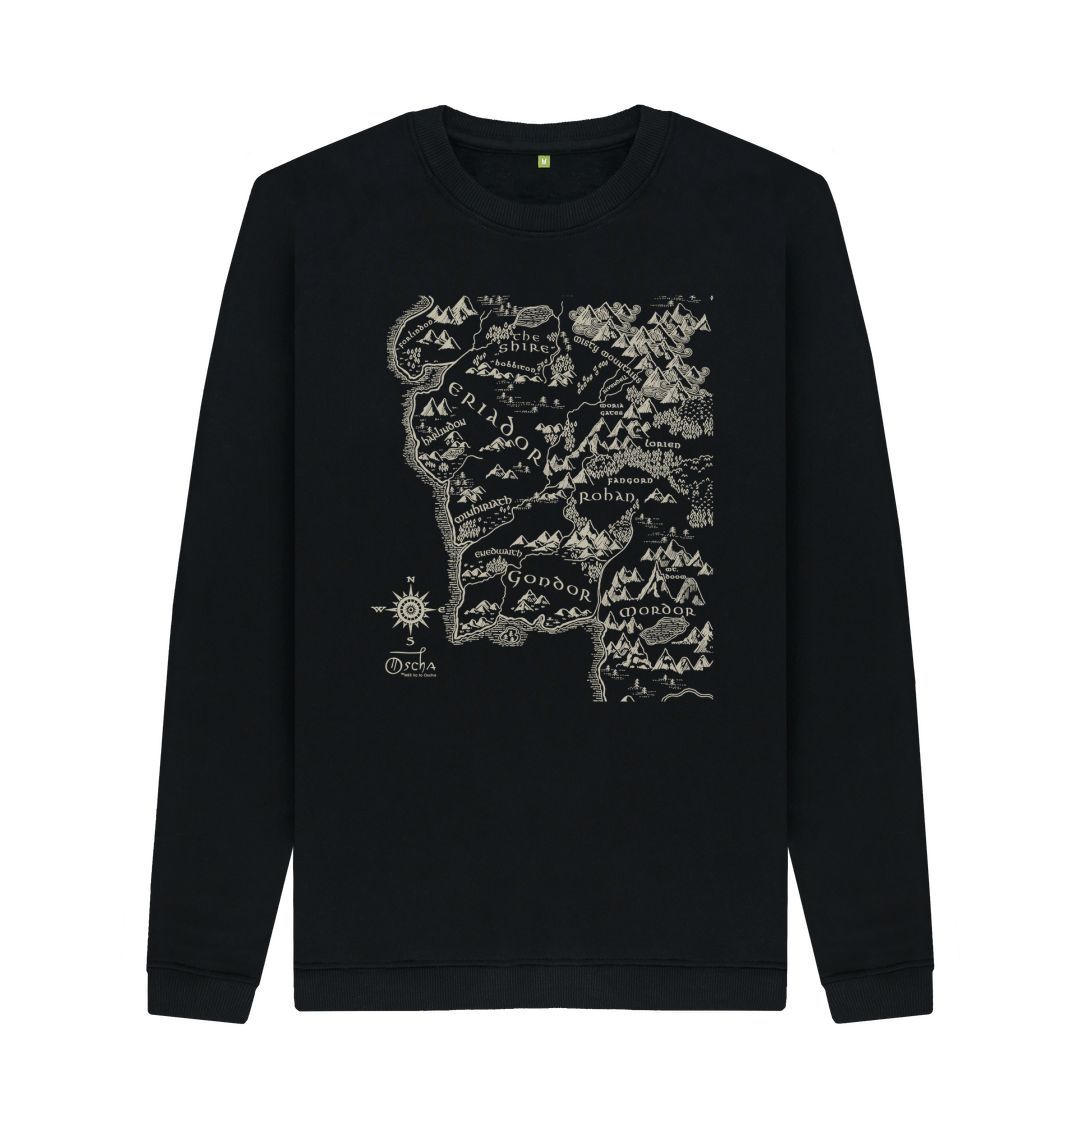 Black Realm of MIDDLE-EARTH\u2122 Crew Neck Sweater